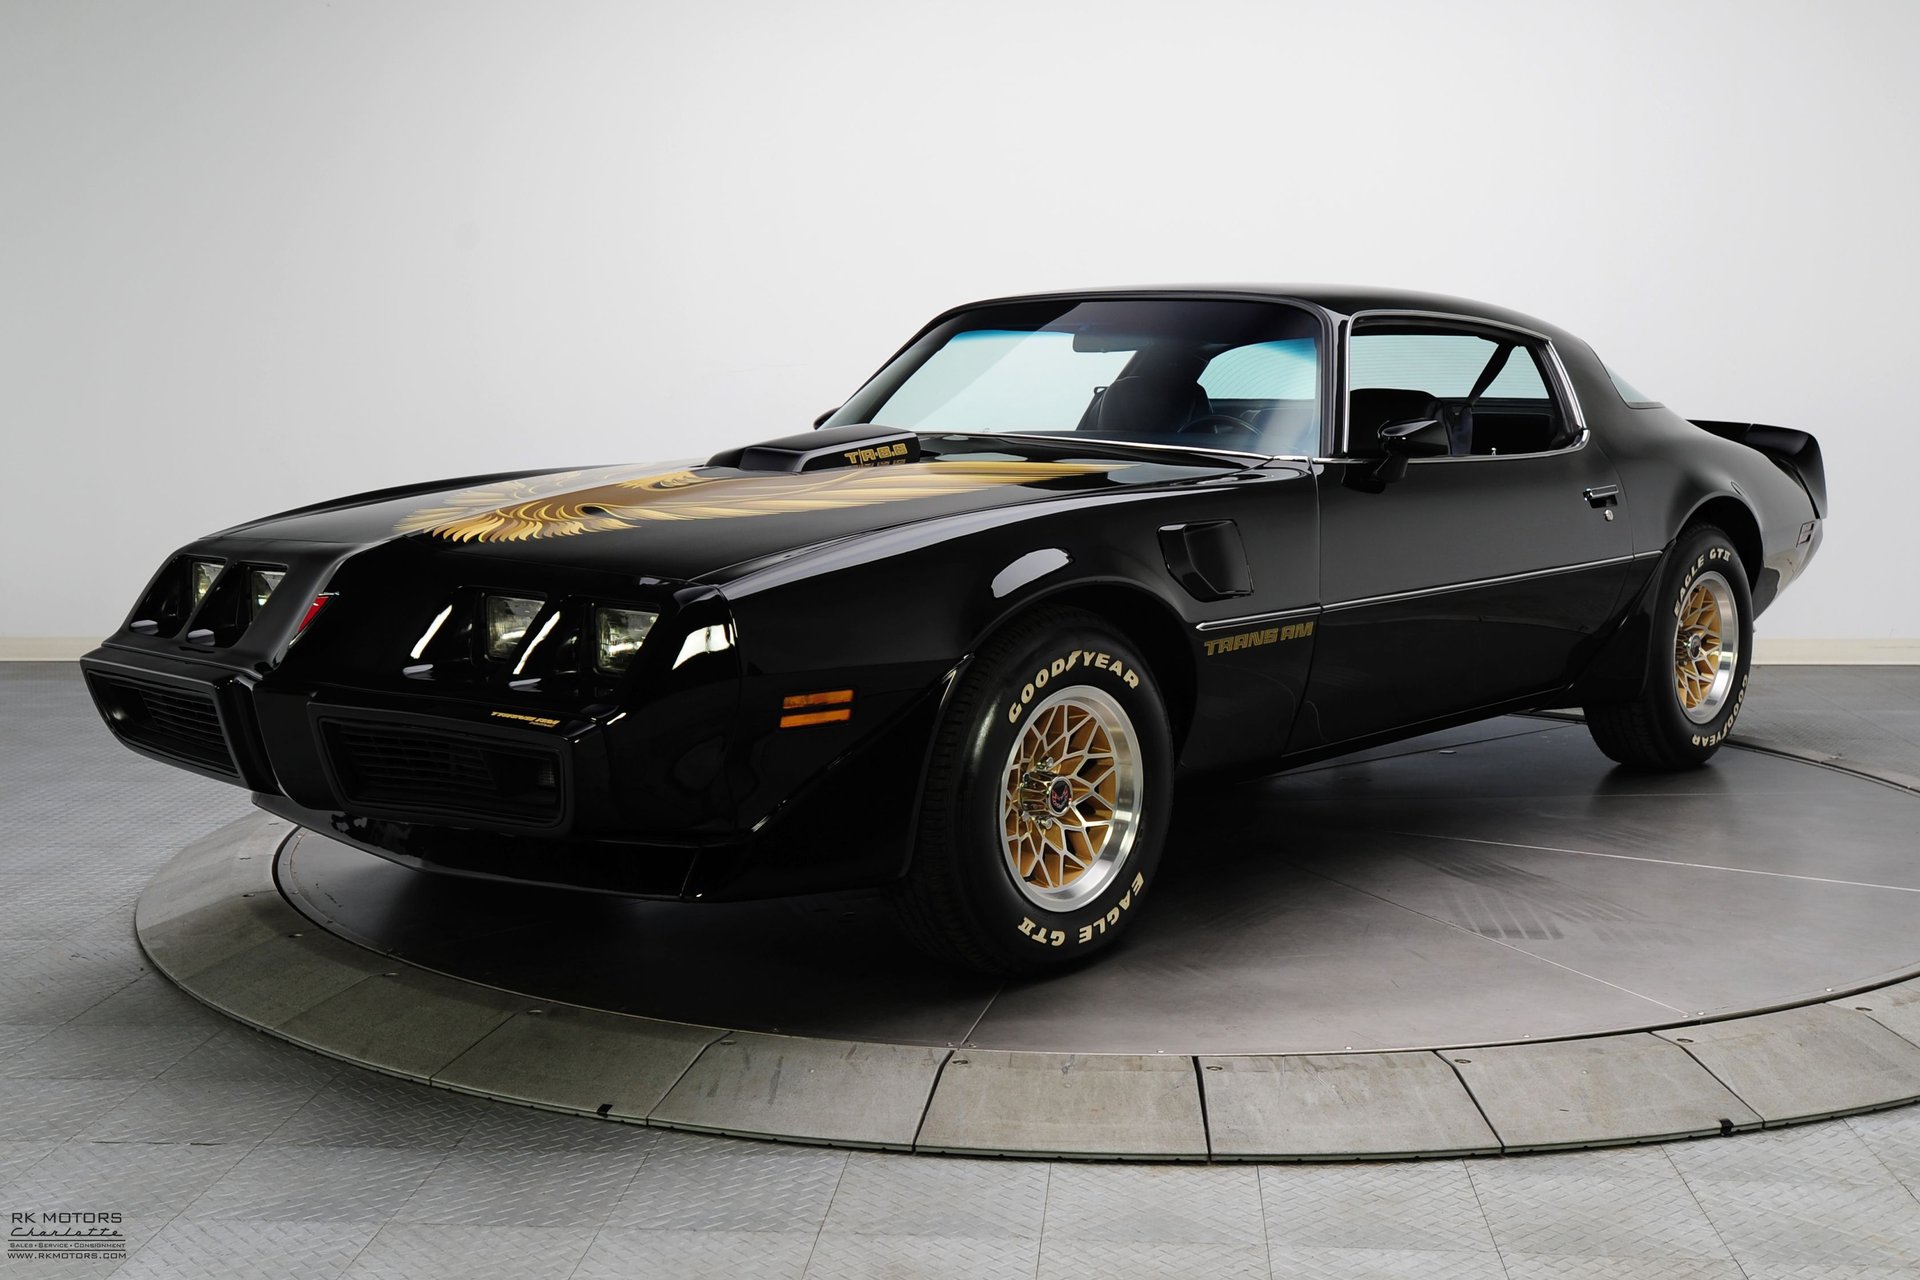 This is a 1979 Pontiac Trans Am Firebird with a new 430bhp V8